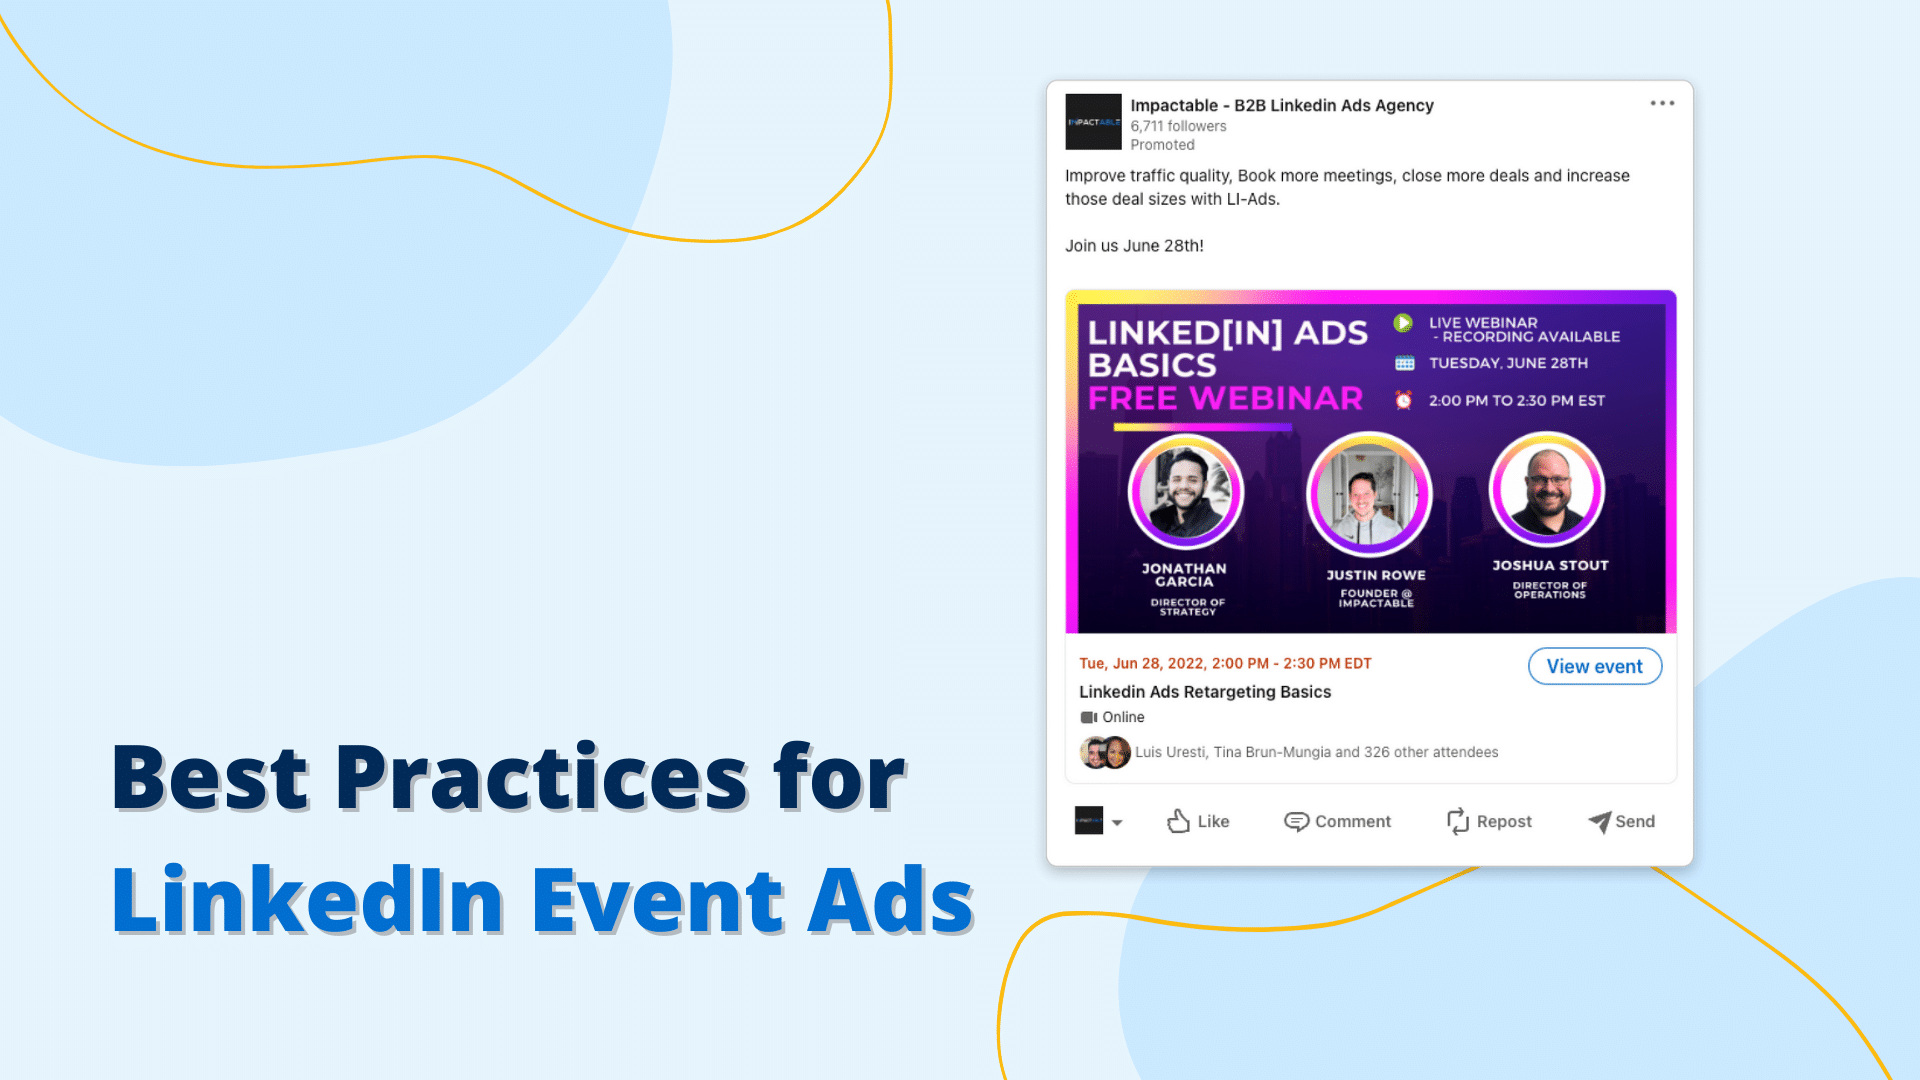 Best Practices for LinkedIn Event Ads